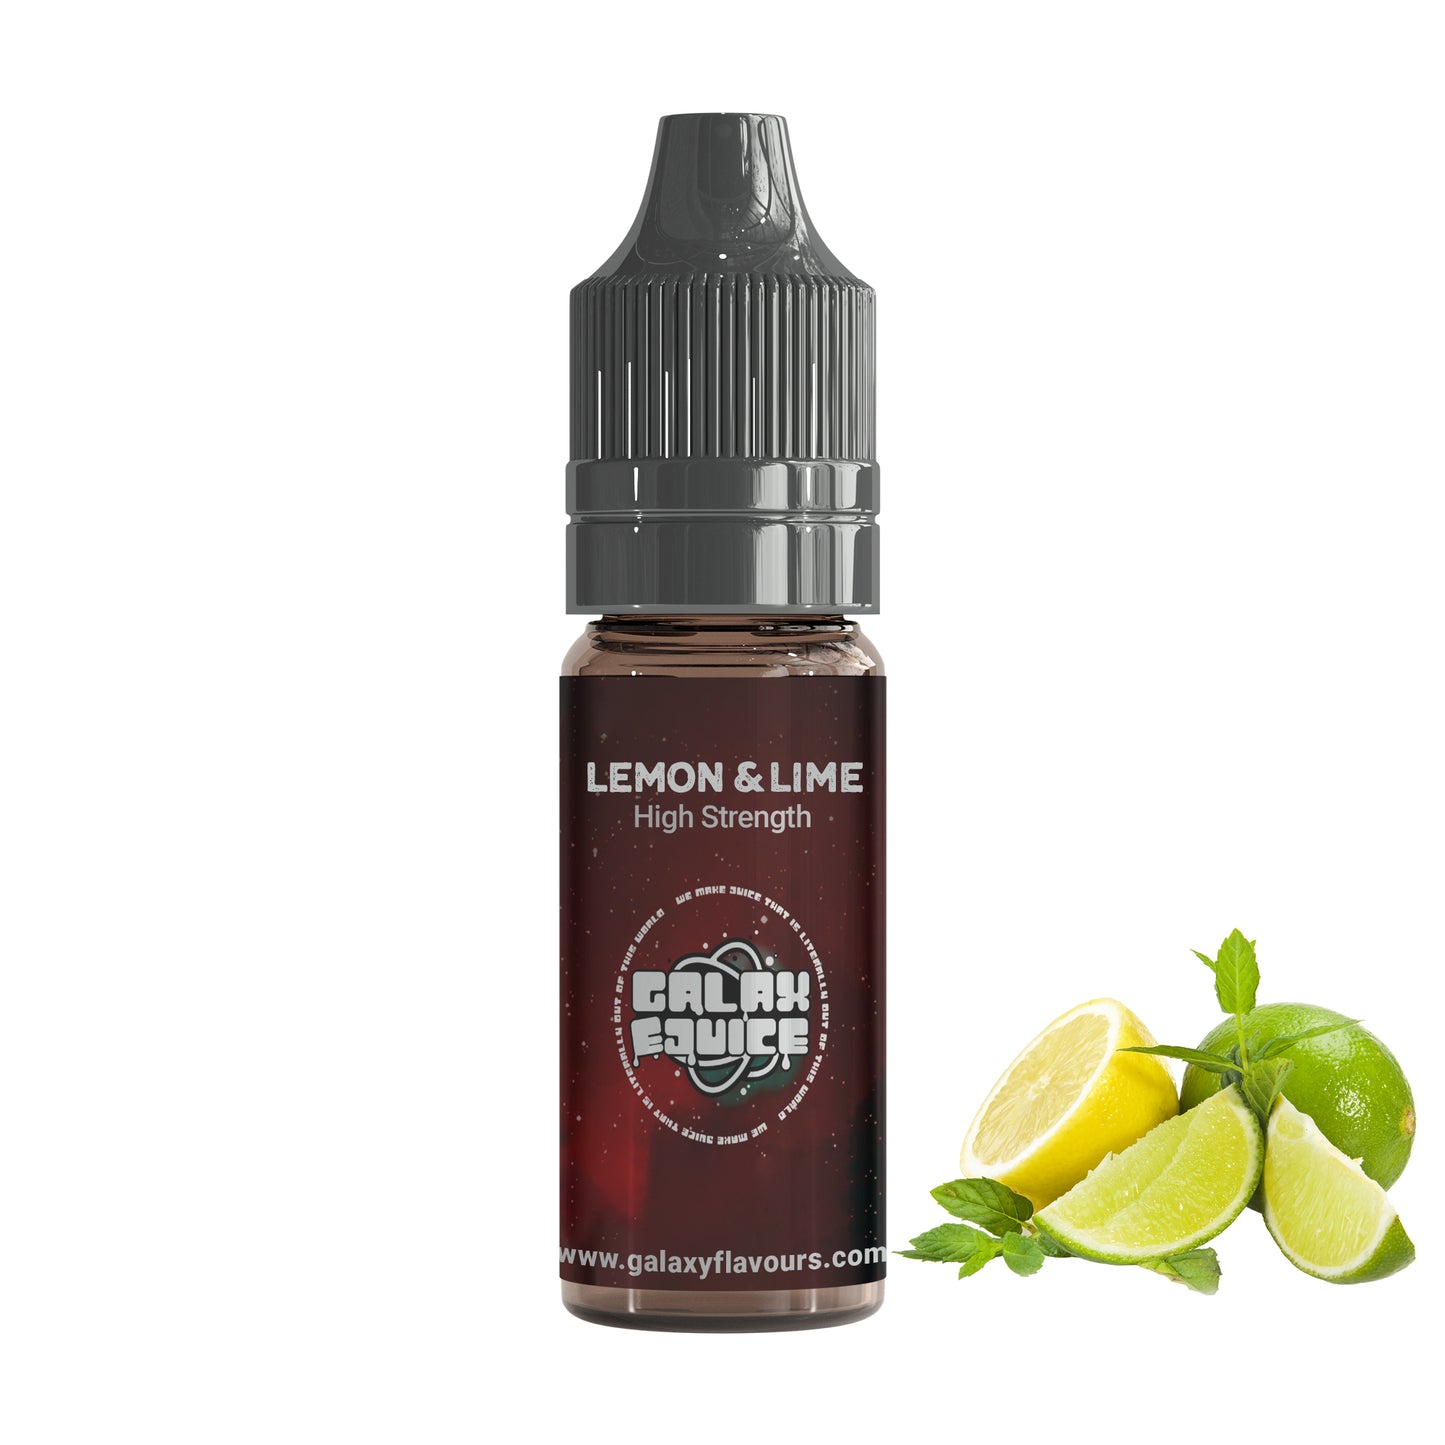 Lemon and Lime High Strength Professional Flavouring.